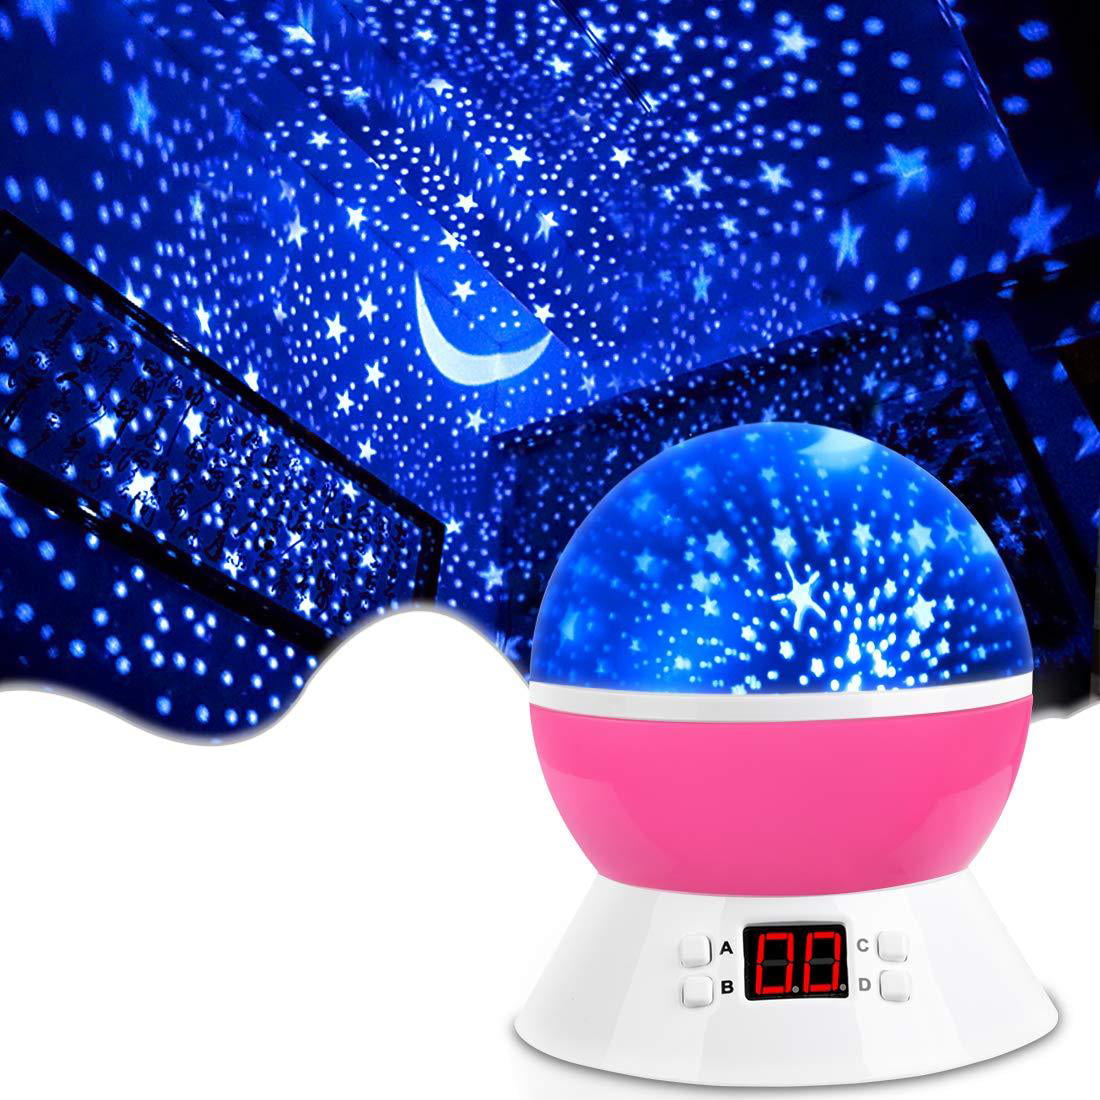 Black Star Toys for 3-8 Year Old Boys Star Projector Night Lights for Kids MOKOQI Starry Sky/Sea Animal Night Lighting Lamp 8 Colors Changing Light for Bedroom 